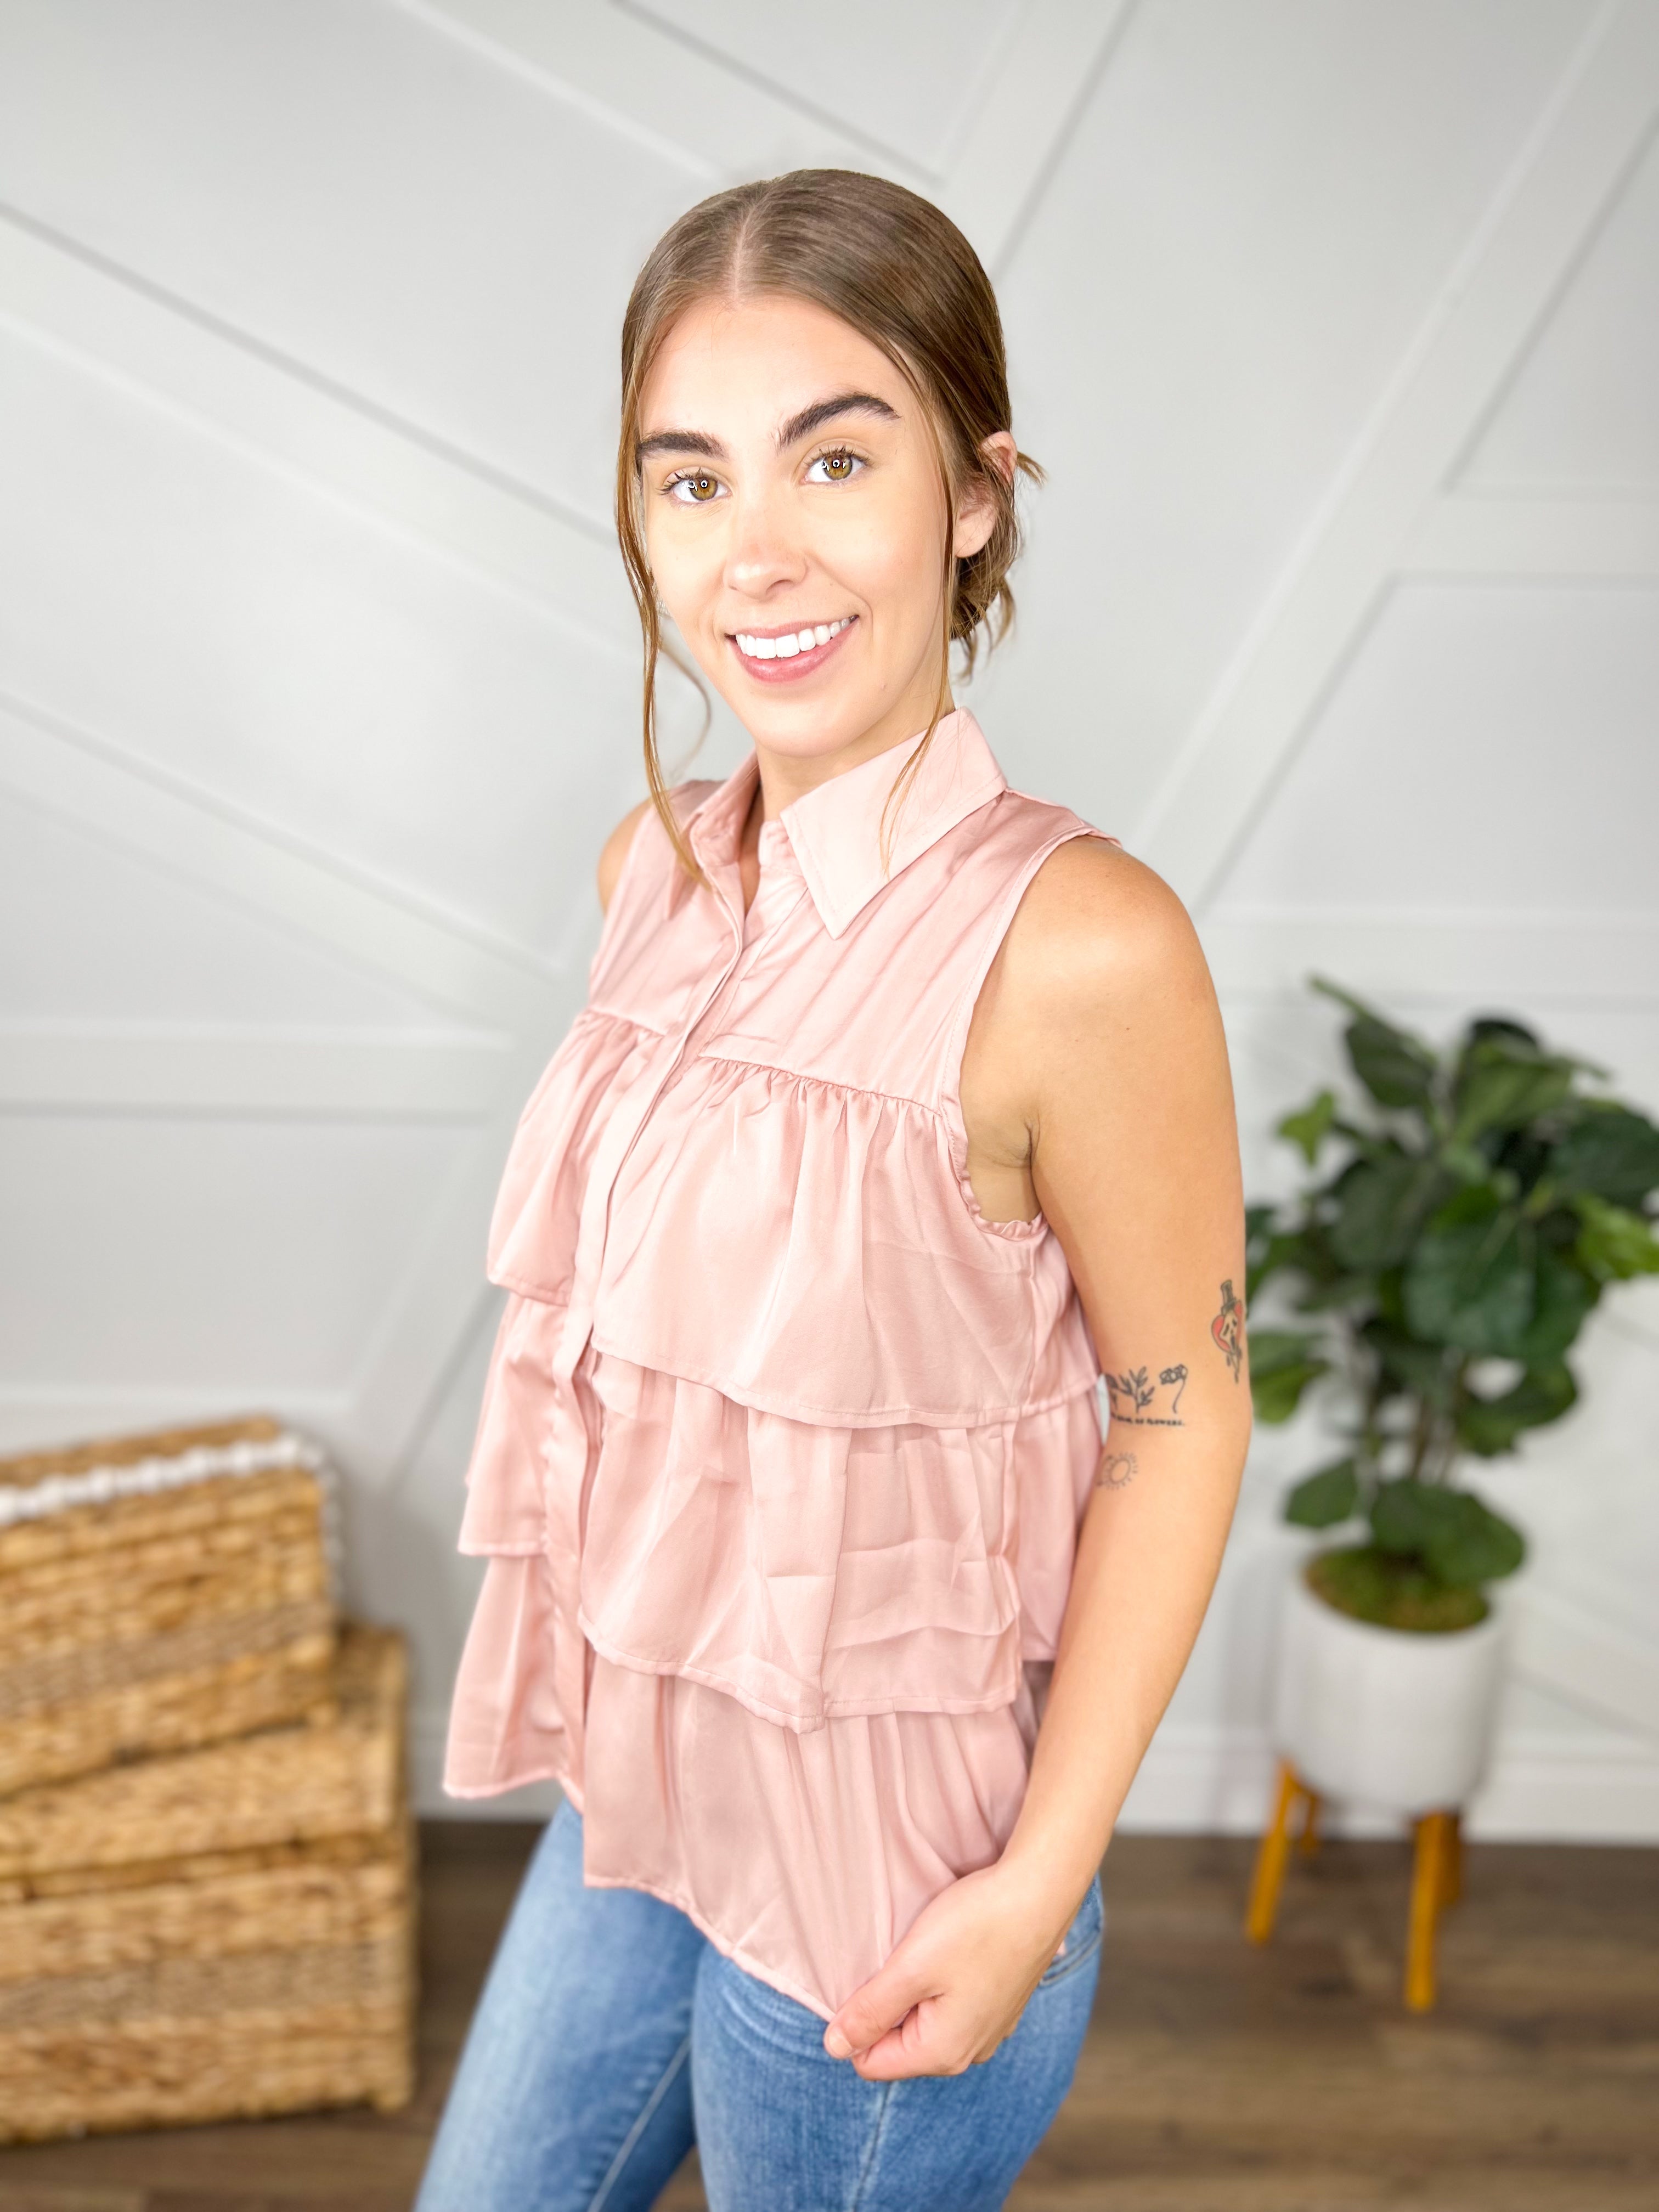 Andrea Ruffle Top-110 Short Sleeve Top-Southern Grace-Heathered Boho Boutique, Women's Fashion and Accessories in Palmetto, FL